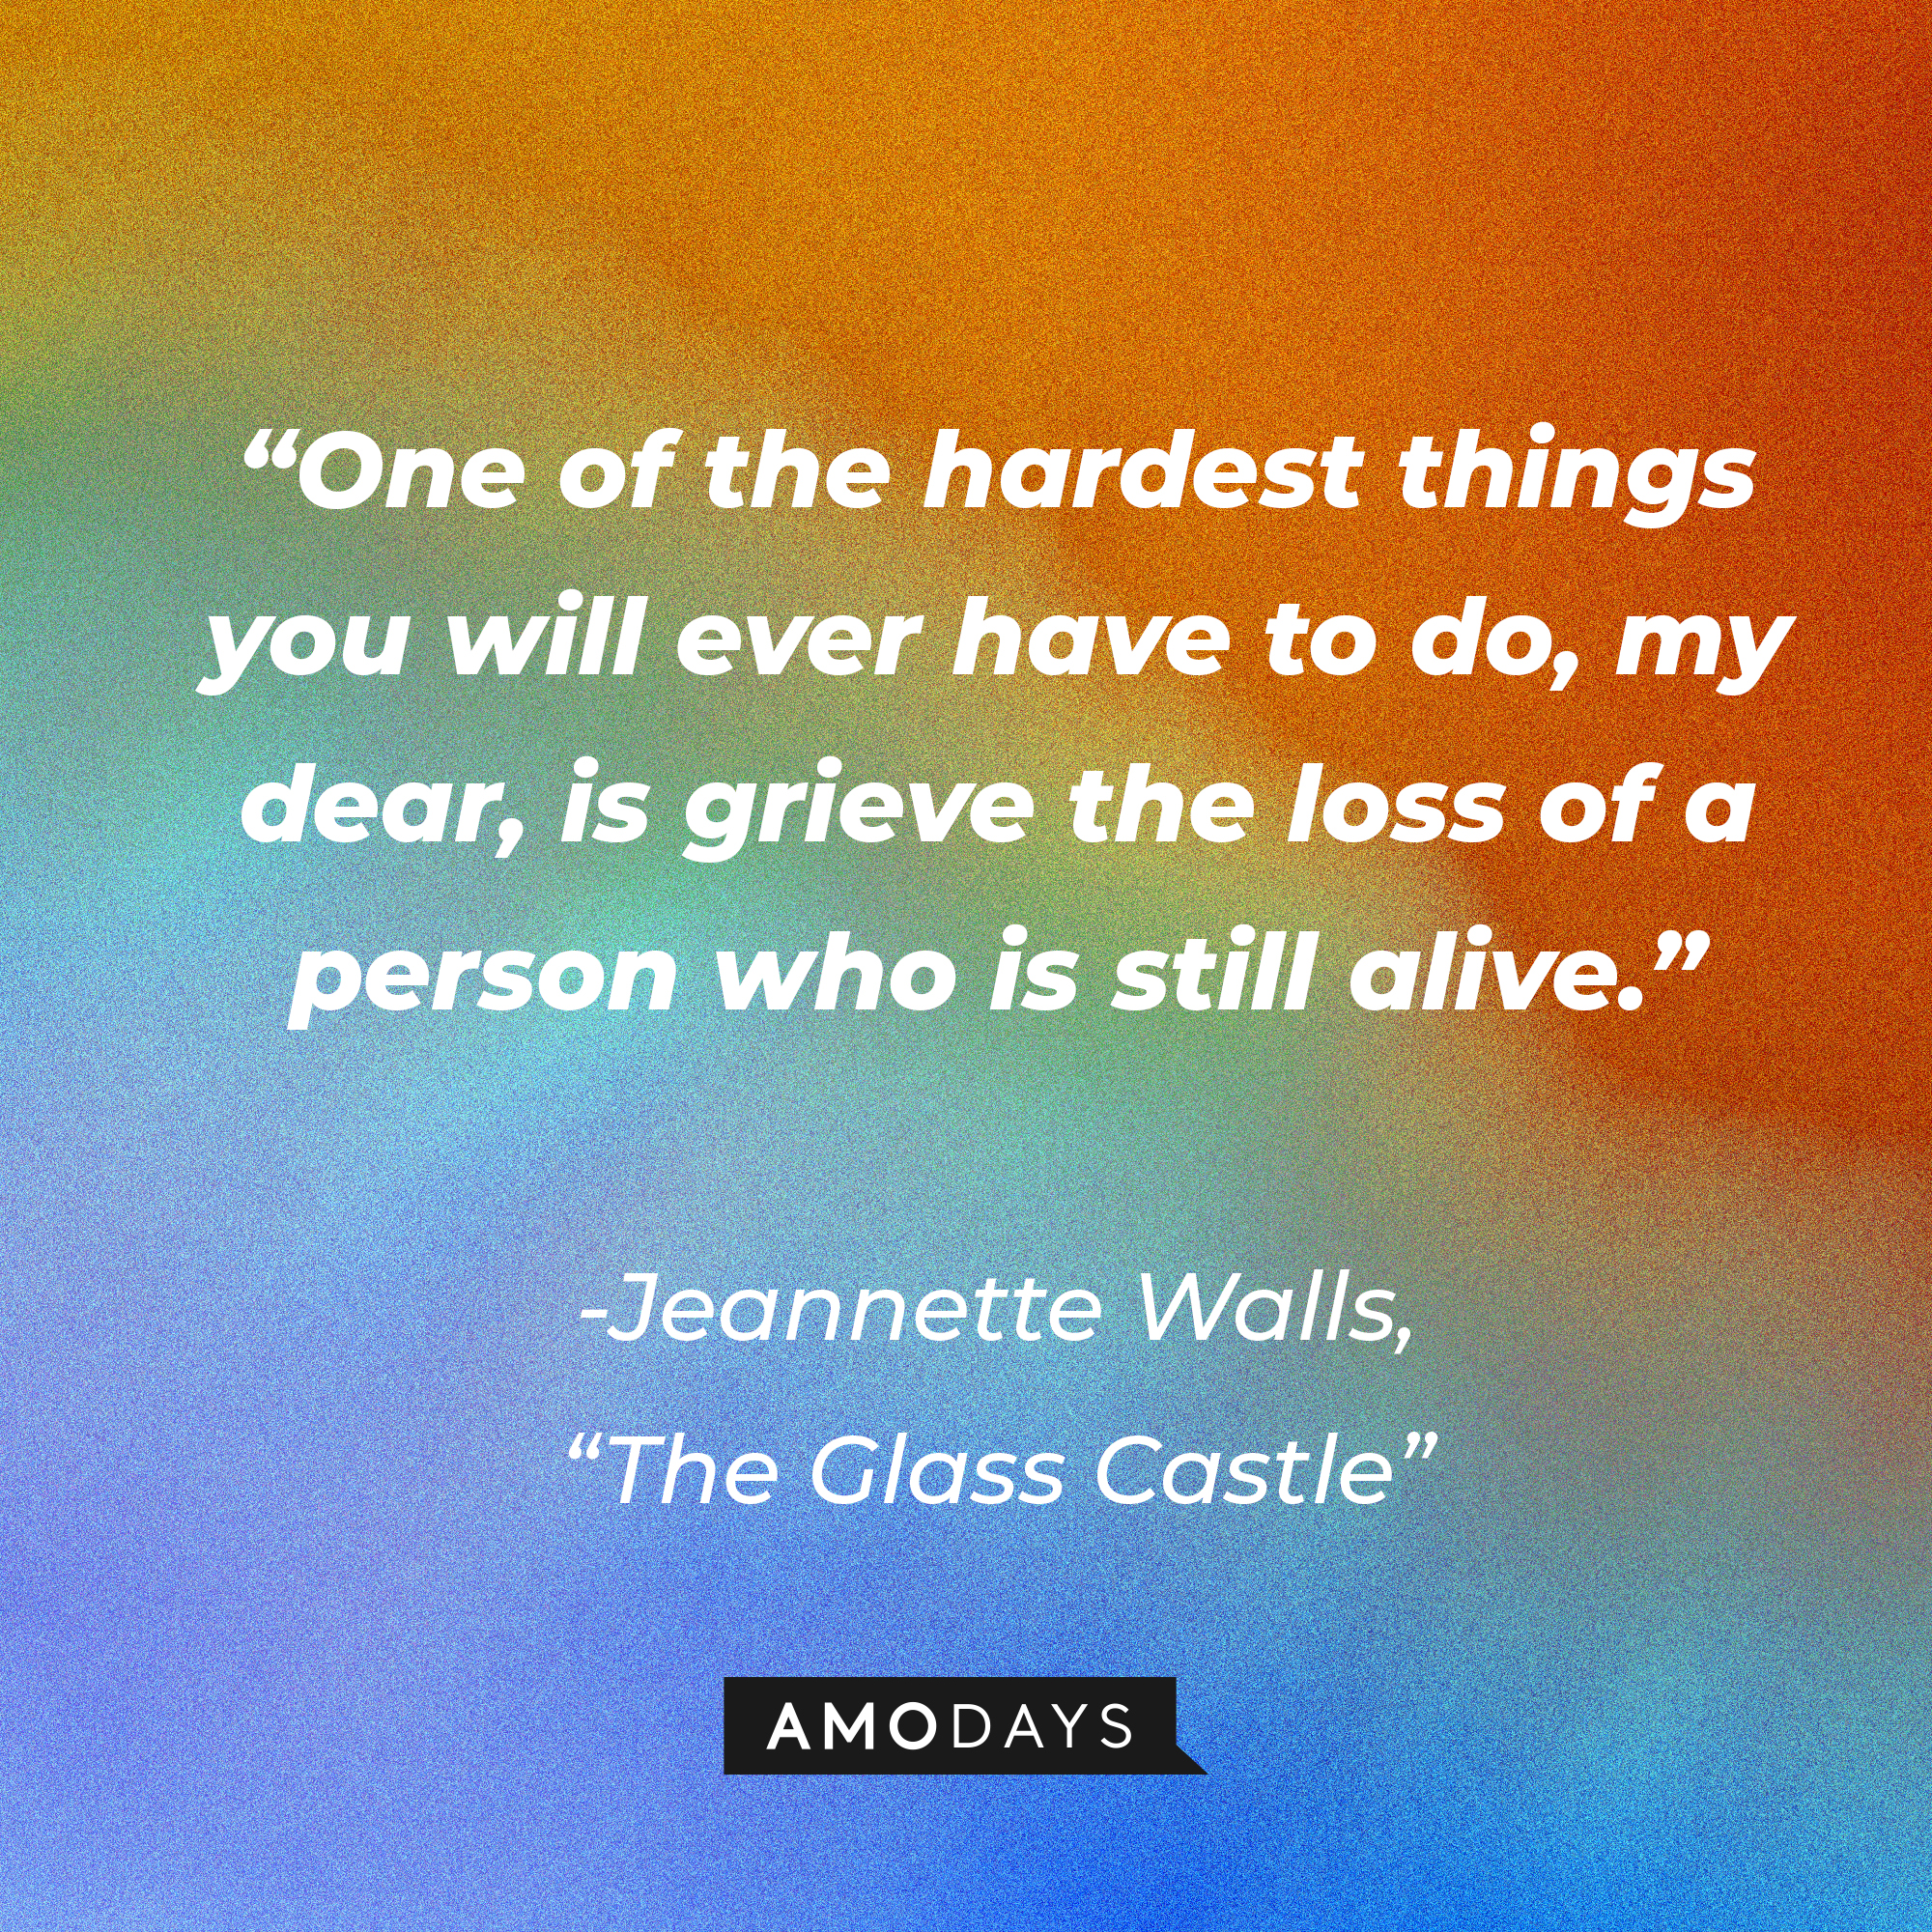 Jeannette Walls' quote: “One of the hardest things you will ever have to do, my dear, is grieve the loss of a person who is still alive.” | Image: AmoDays